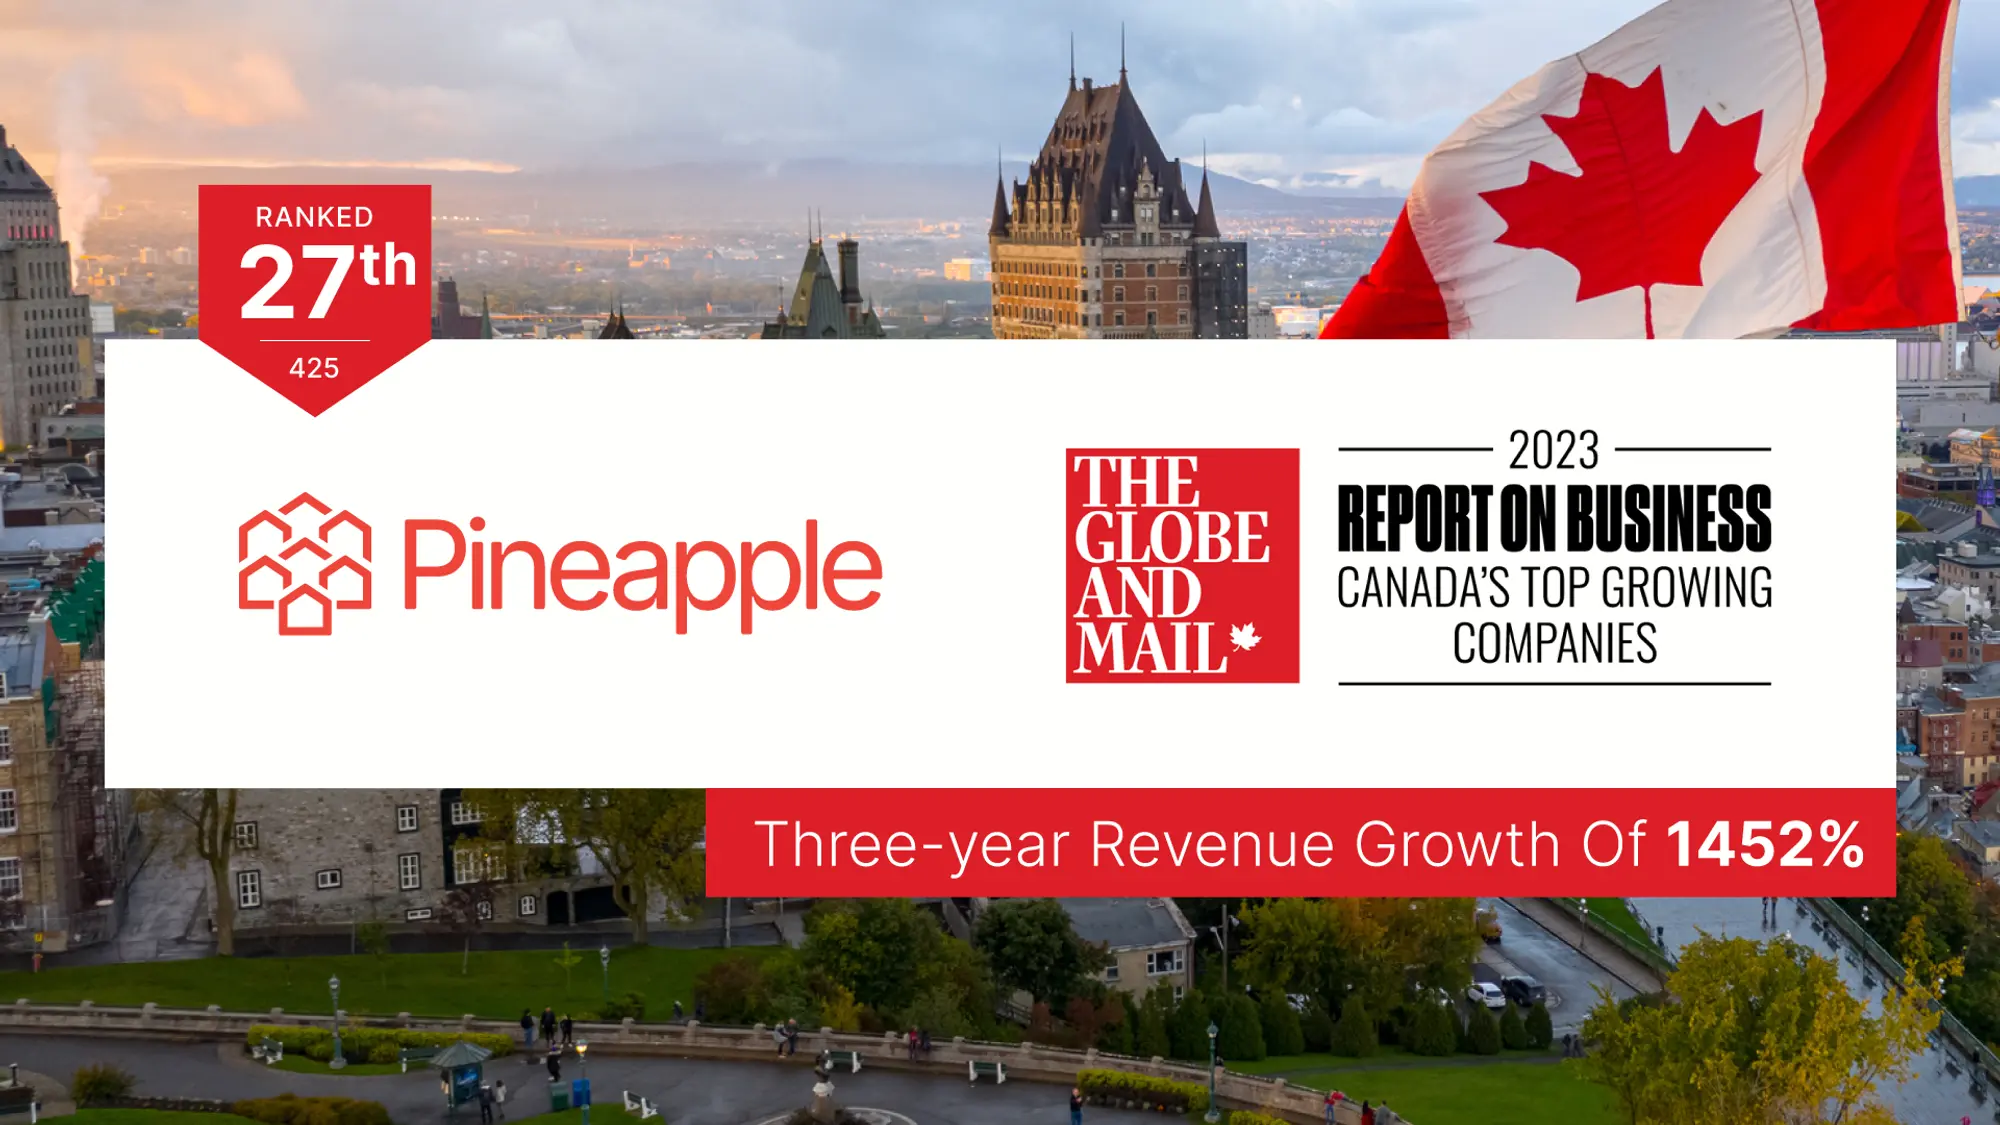 Pineapple Recognized as One of Canada’s Top-Growing Companies 